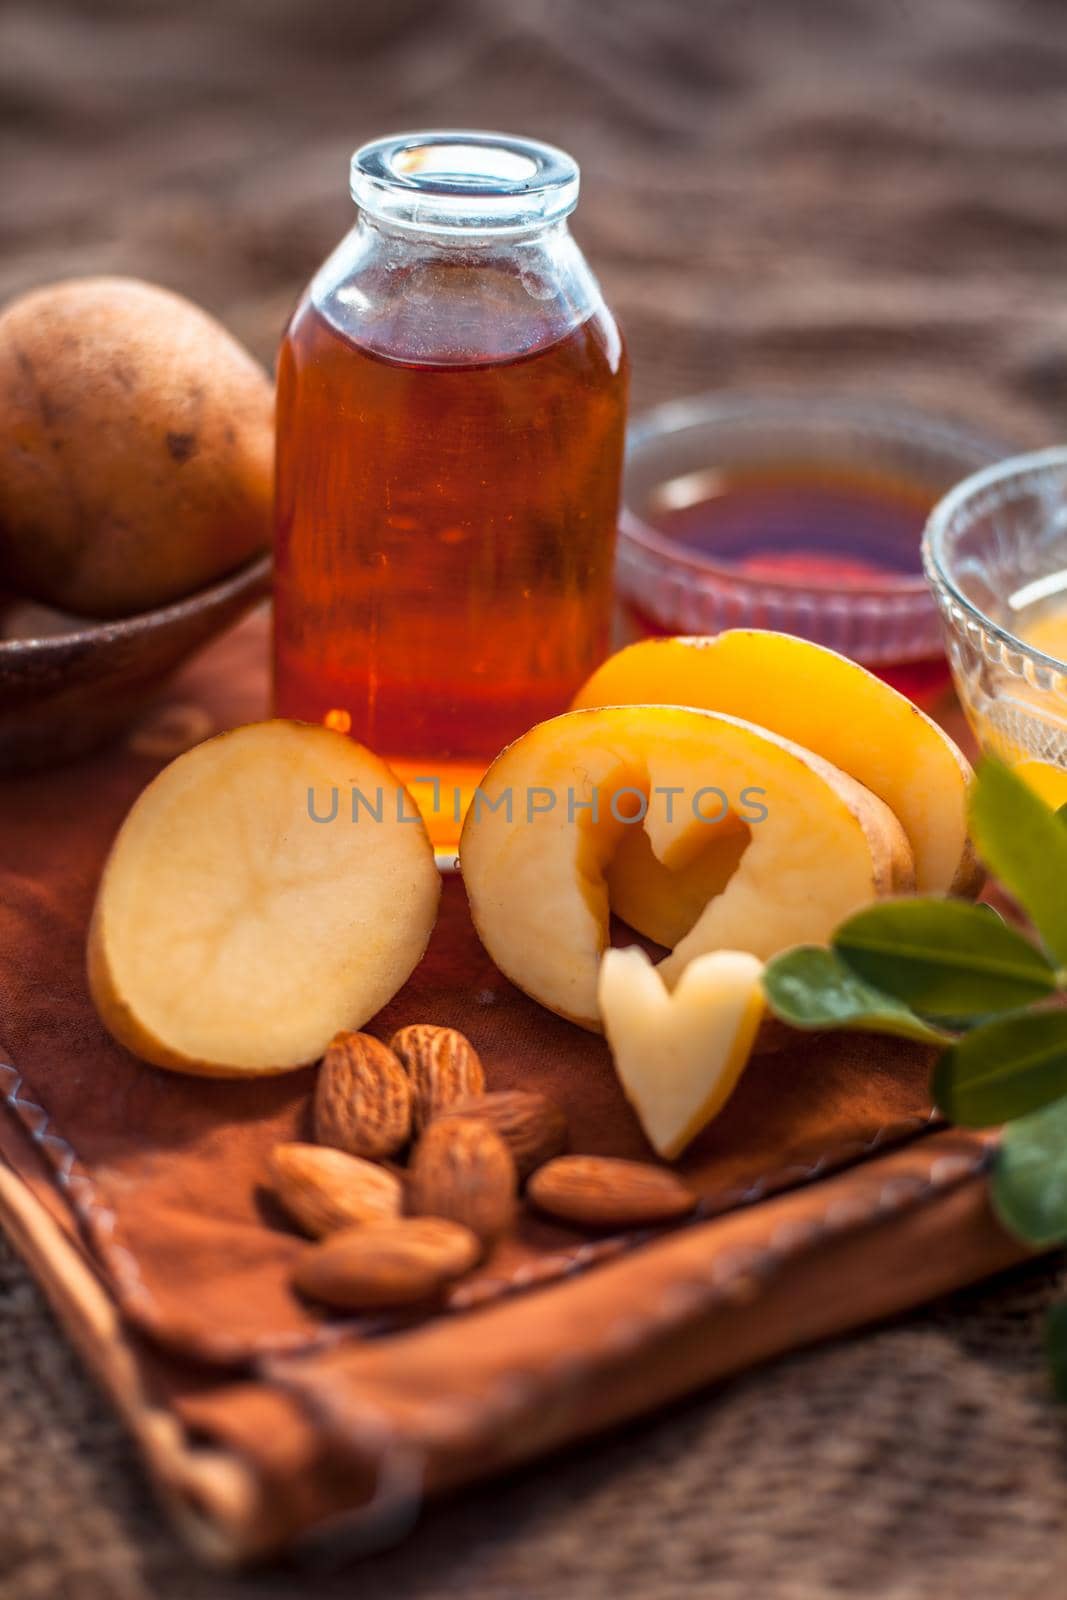 Glowing face mask of potato juice in a glass bowl on brown colored surface along with some Potato juice,honey and almond oil.Horizontal shot.To eliminate skin rashes, remove impurities,etc. by mirzamlk